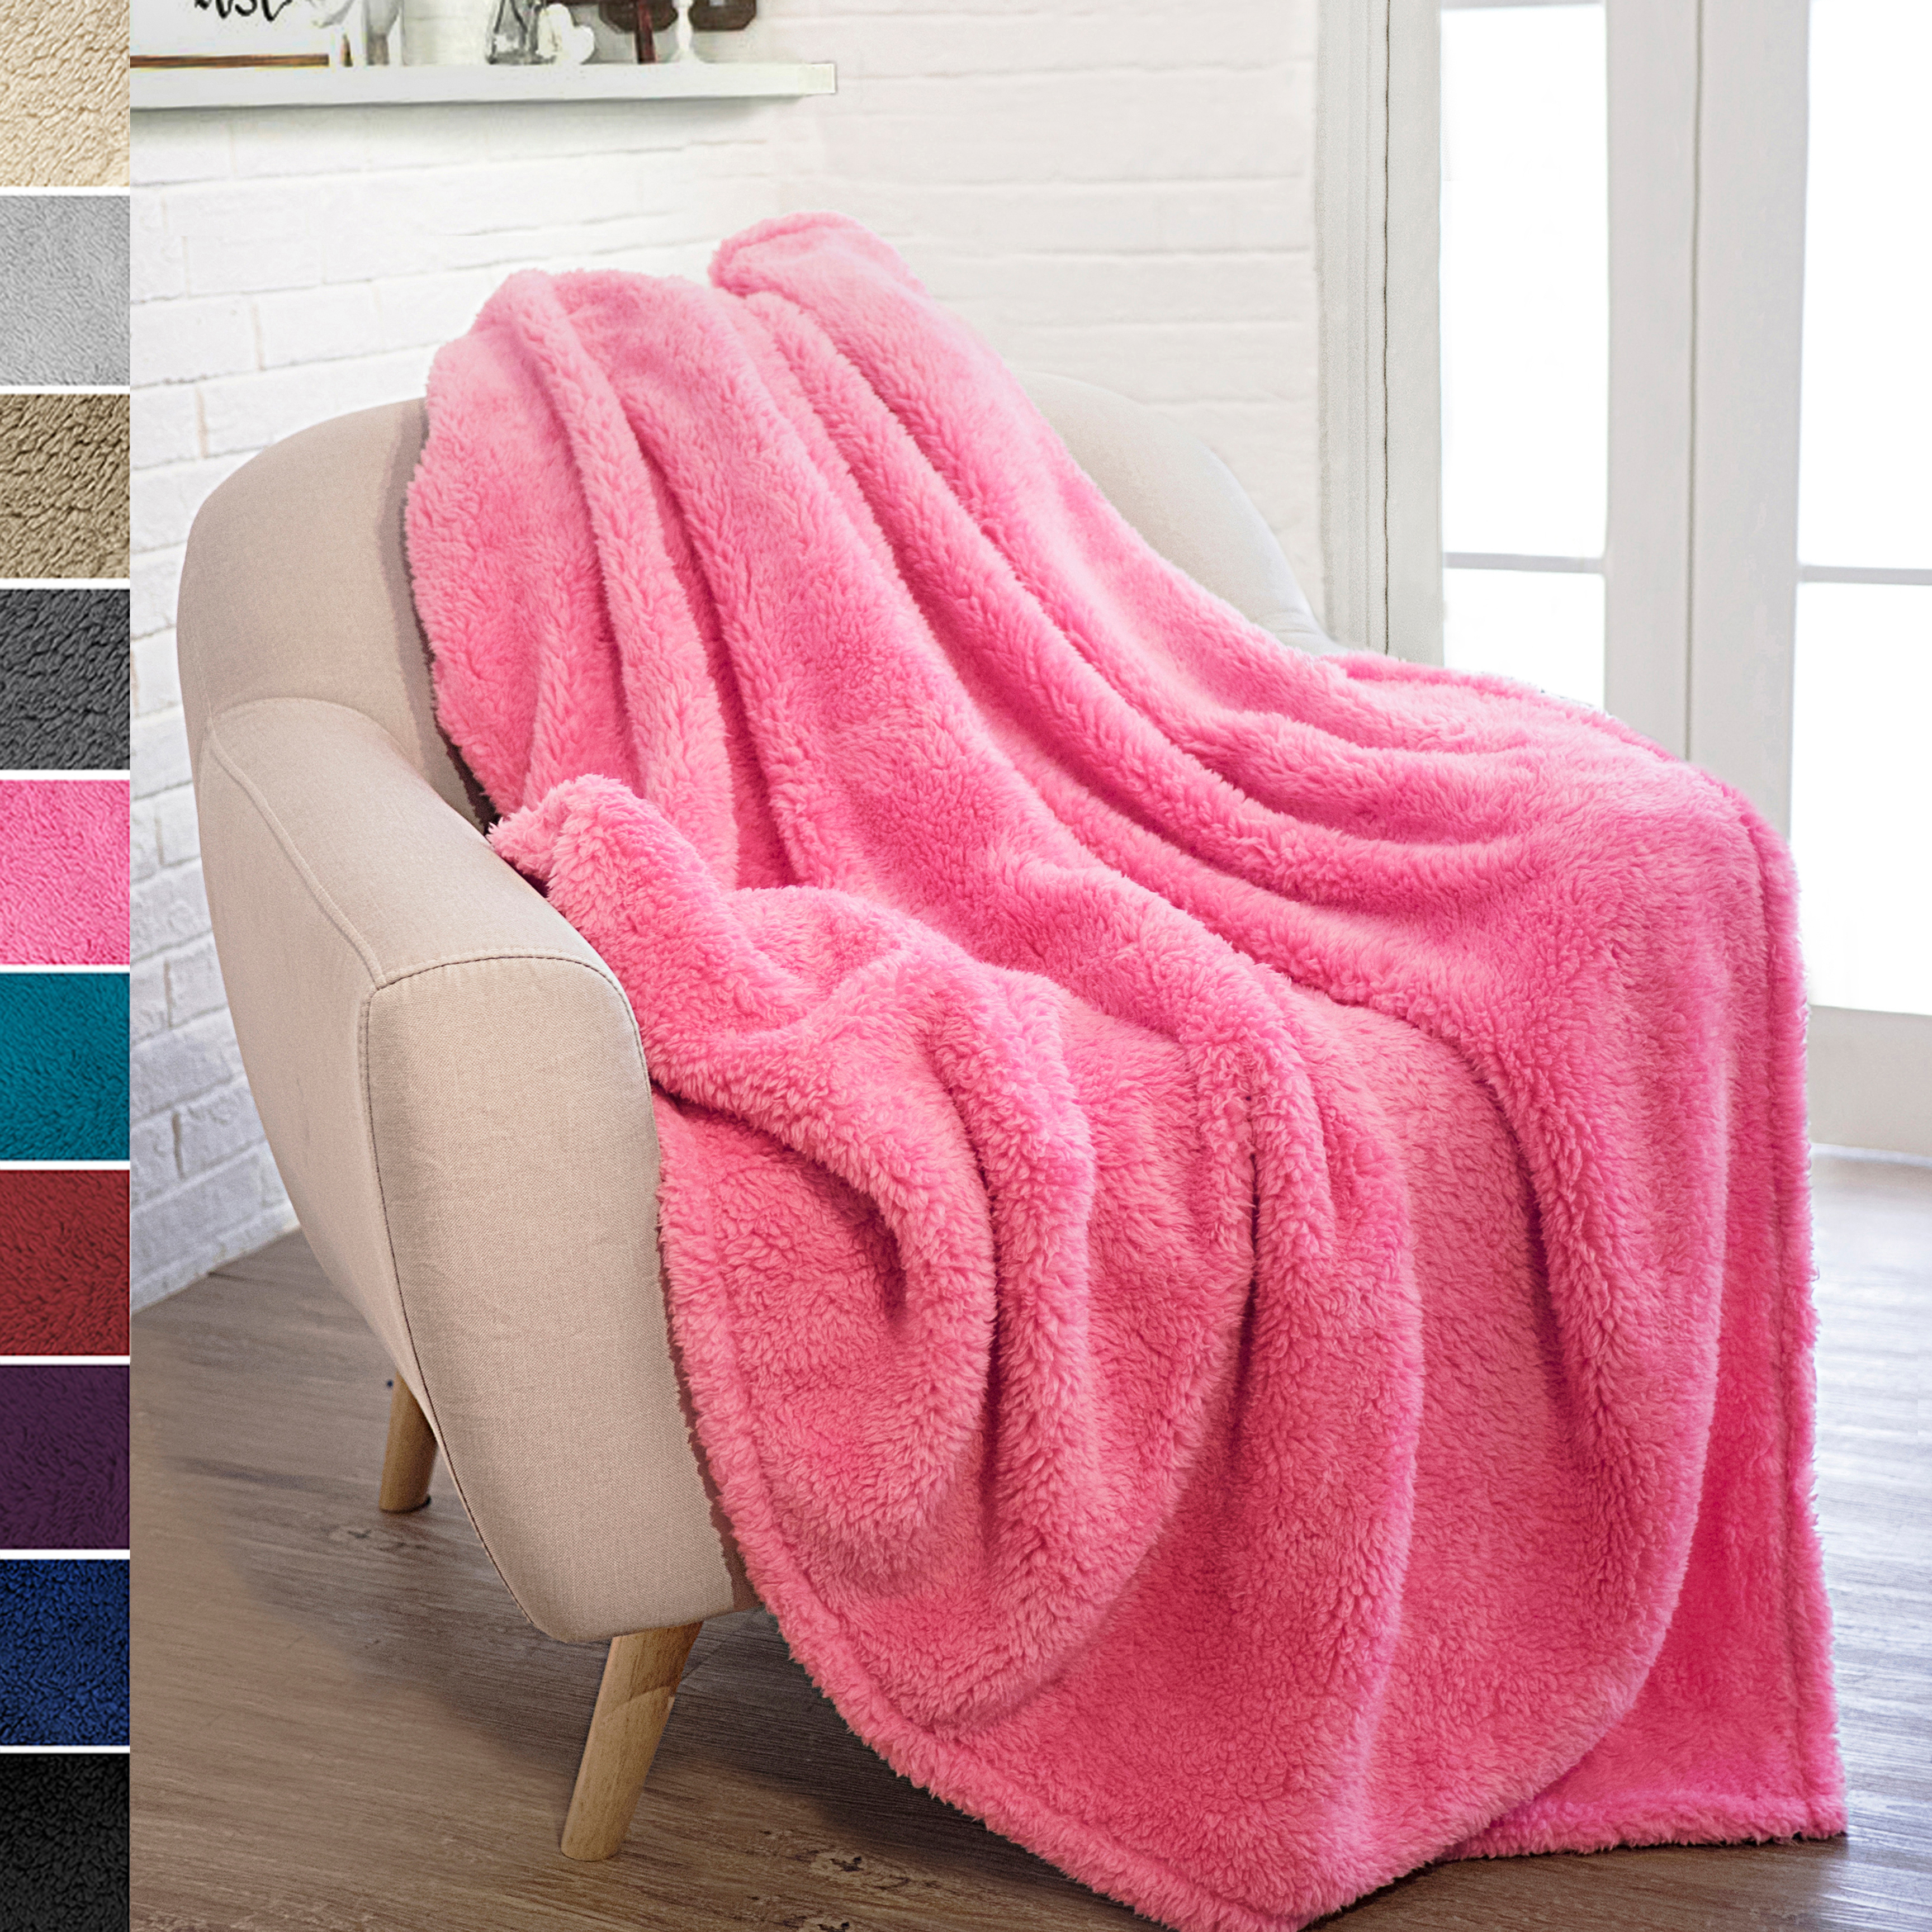 PAVILIA Plush Sherpa Throw Blanket for Couch Sofa | 50 X 60 Inches Pink for  sale online | eBay